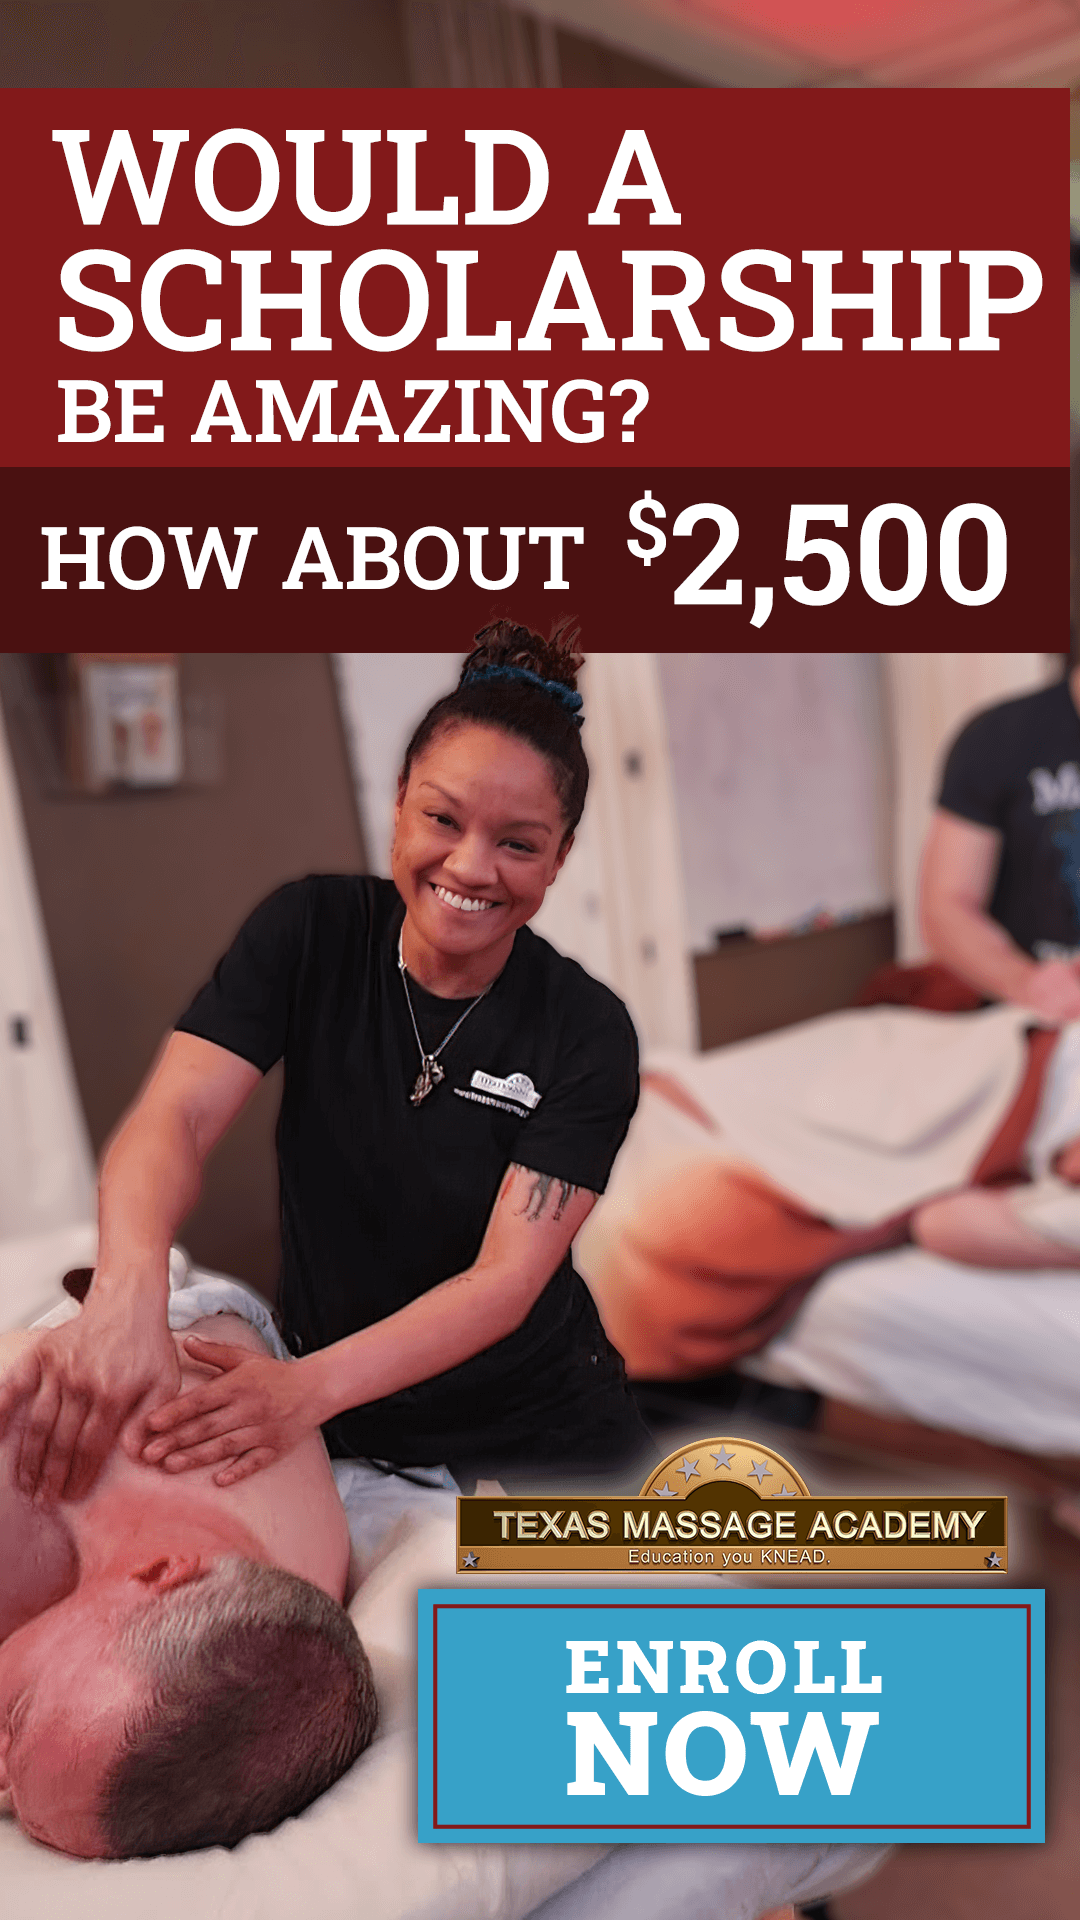 female massage therapy student smiling at camera and loving massage school telling you to explore grant or scholarship options for your edcuation